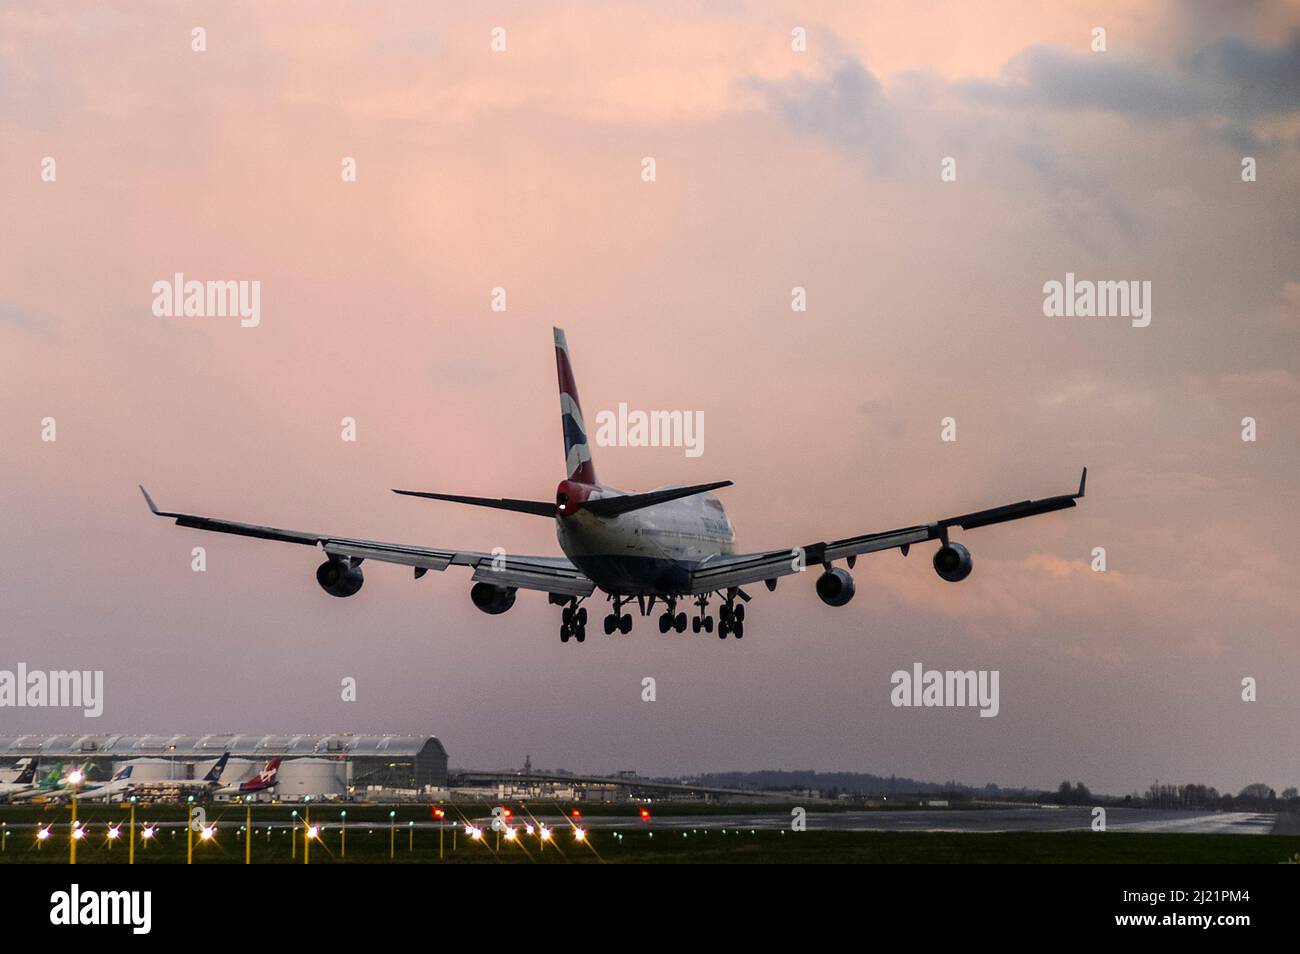 British Airways Boeing 747 -400 Jumbo Jet plane landing at London Heathrow Airport, UK, at dusk with sunset colours in cloudy sky. Runway lights Stock Photo